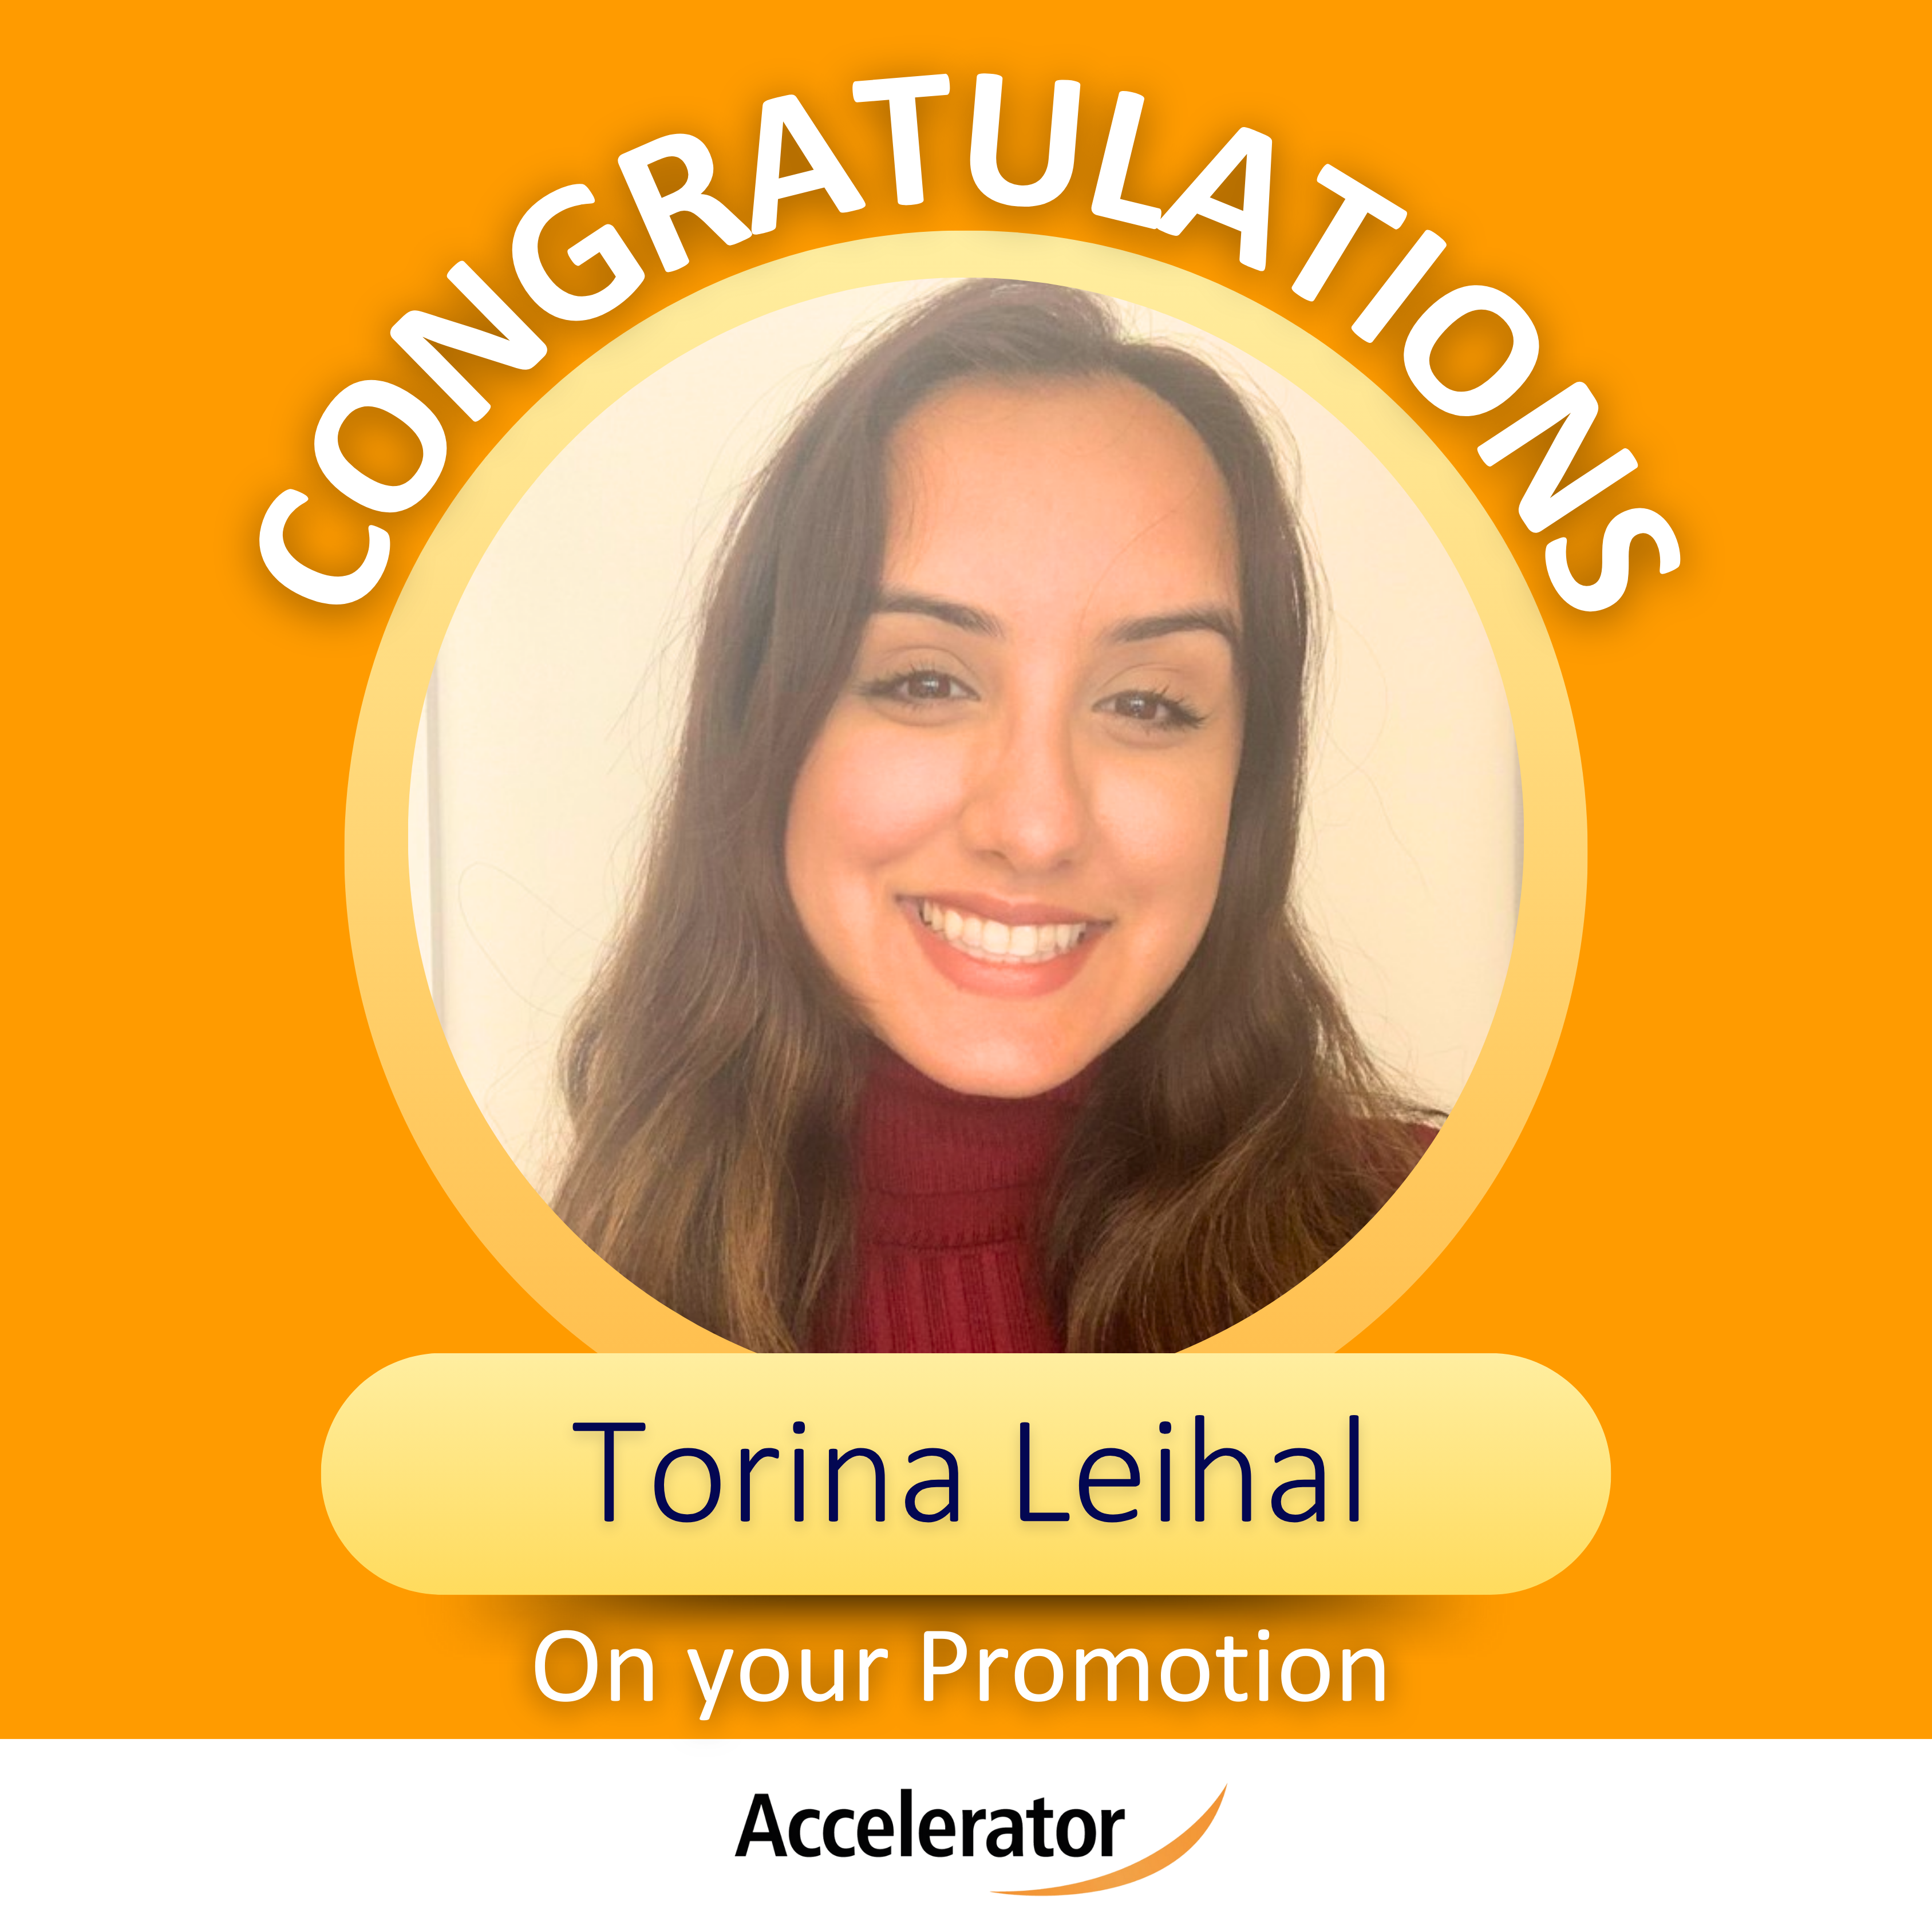 Torina has been promoted to the role of Research Consultant!